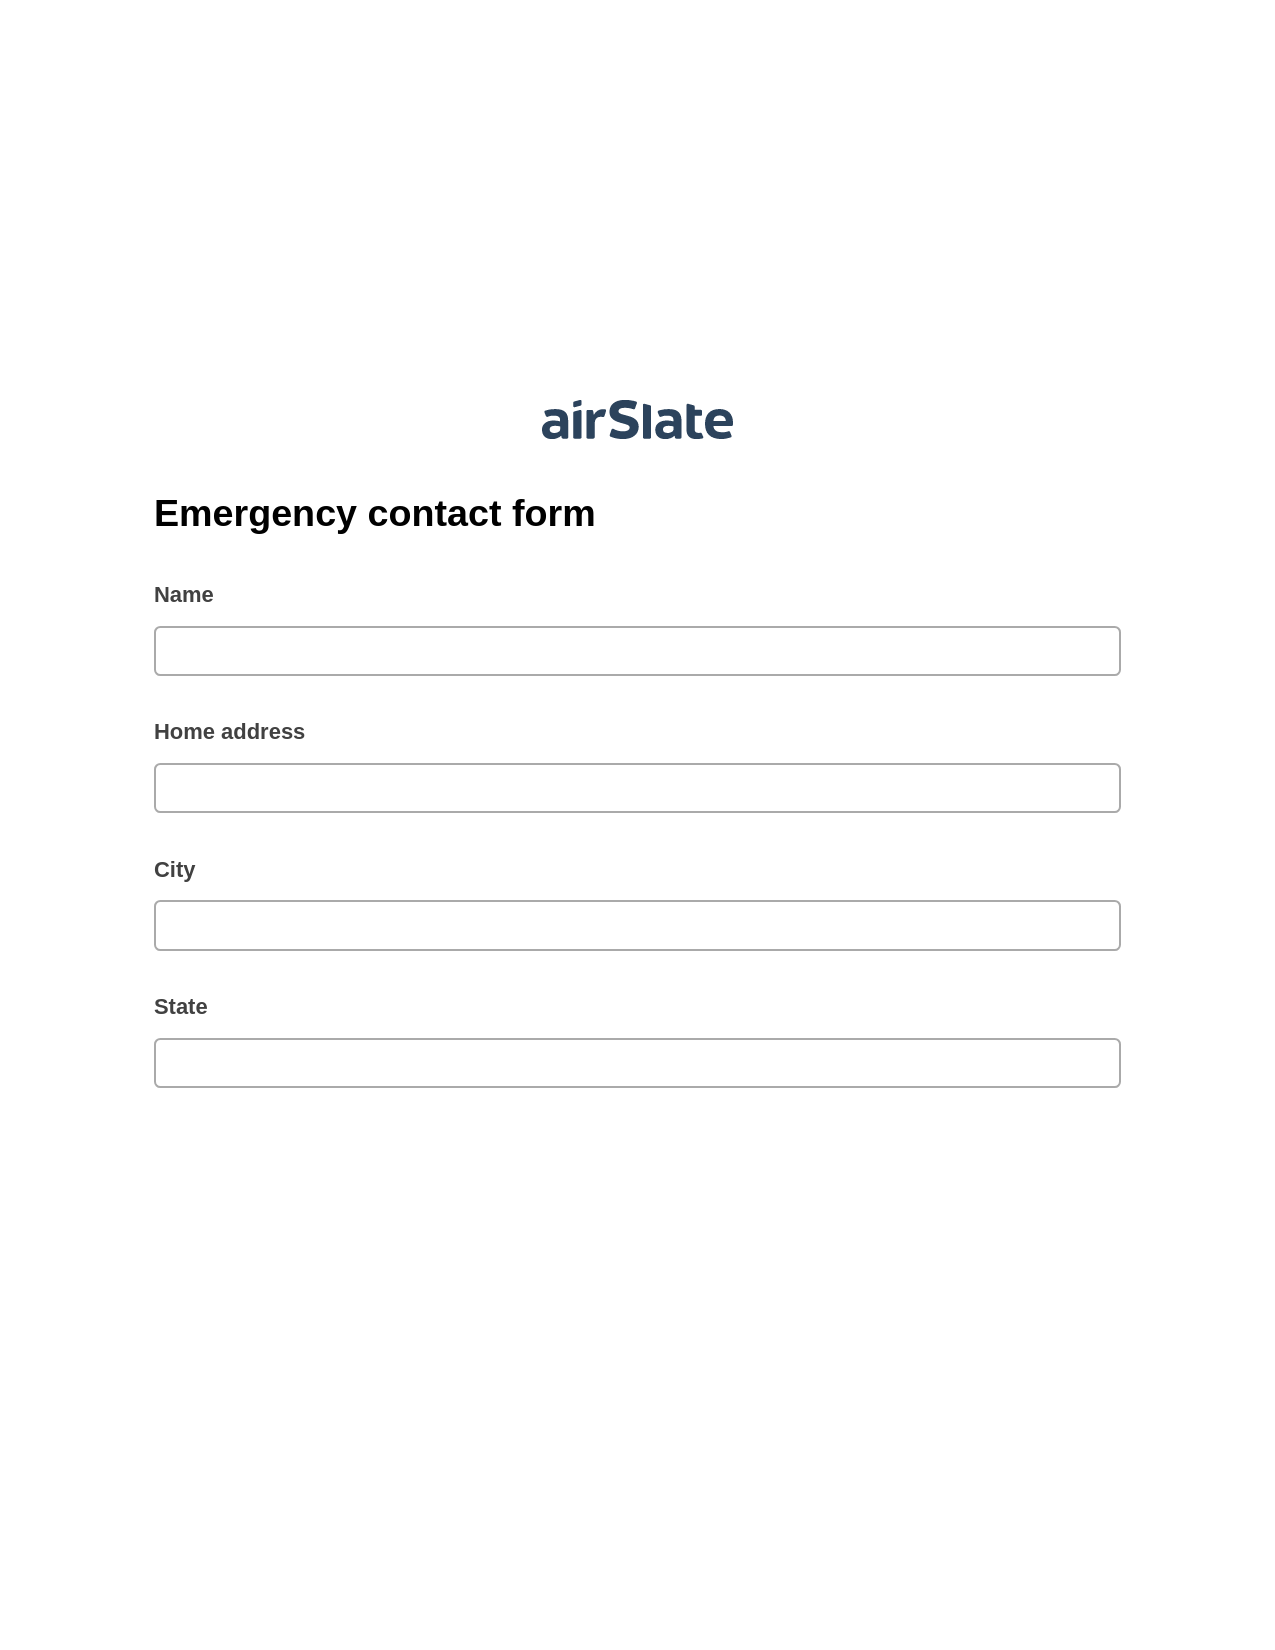 Multirole Emergency contact form Pre-fill Slate from MS Dynamics 365 Records Bot, Create Slate from another Flow Bot, Export to Google Sheet Bot